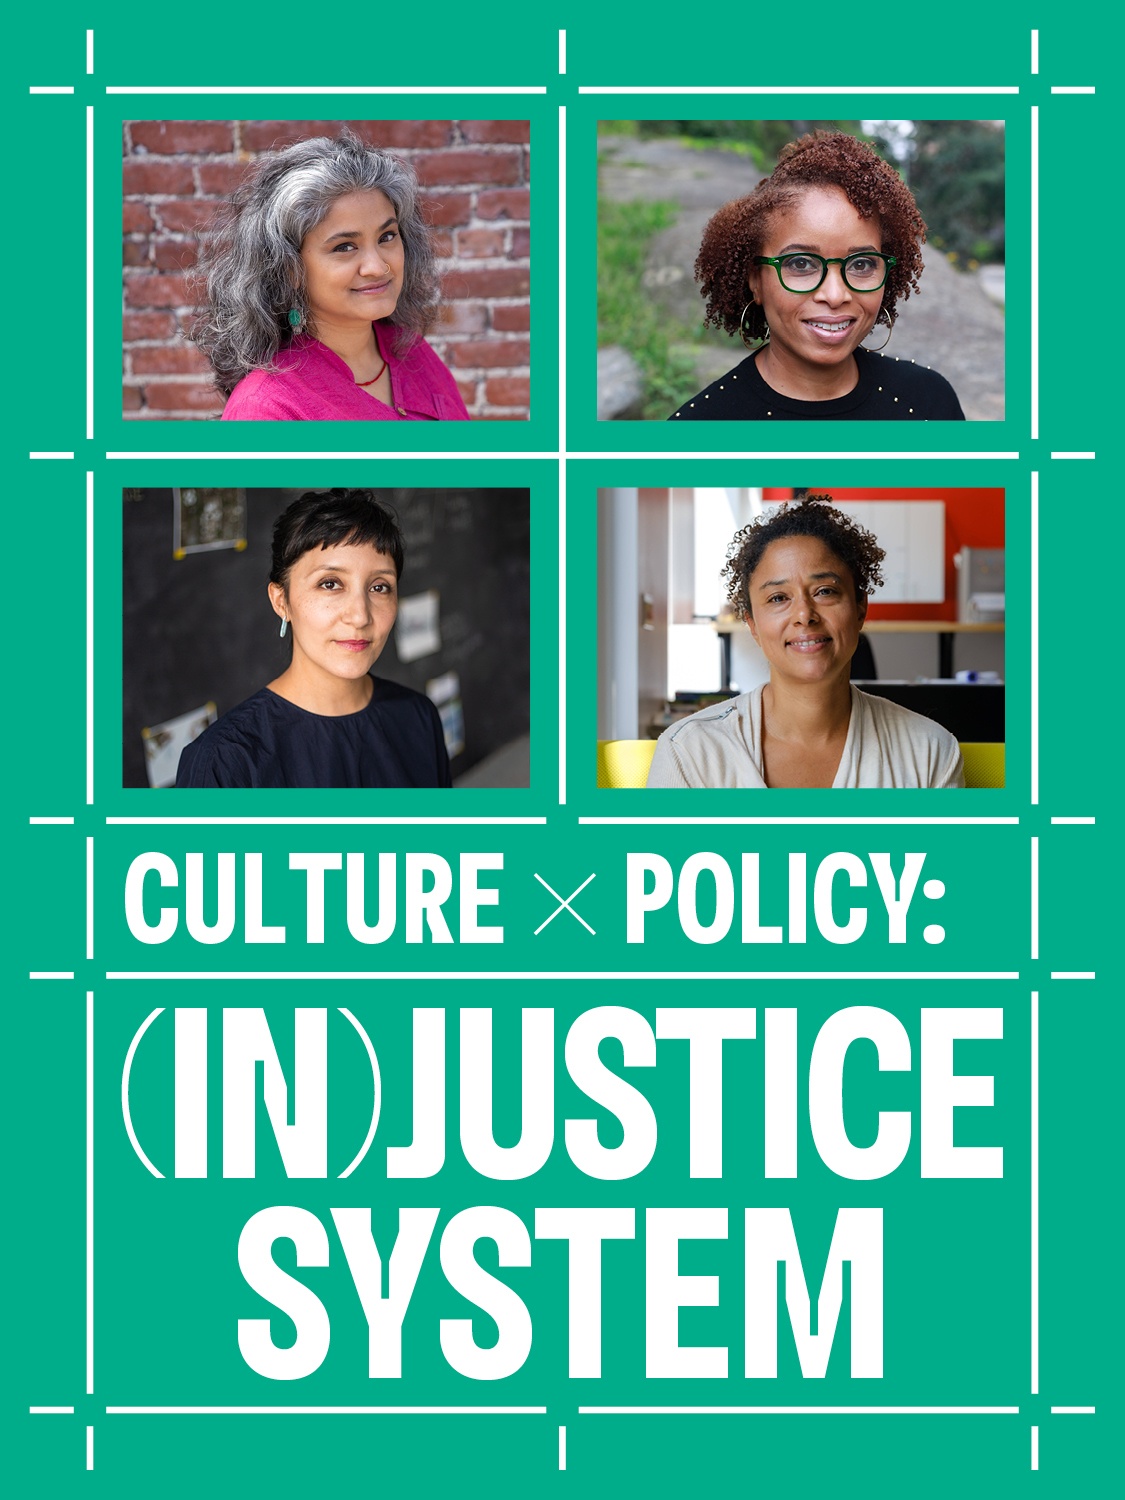 A white grid on a green background that contains four photos of participants in the Culture x Policy: (In)Justice System conversation, Clockwise from top left: sujatha baliga, Nicole Fleetwood, Deanna Van Buren, and Maria Gaspar.